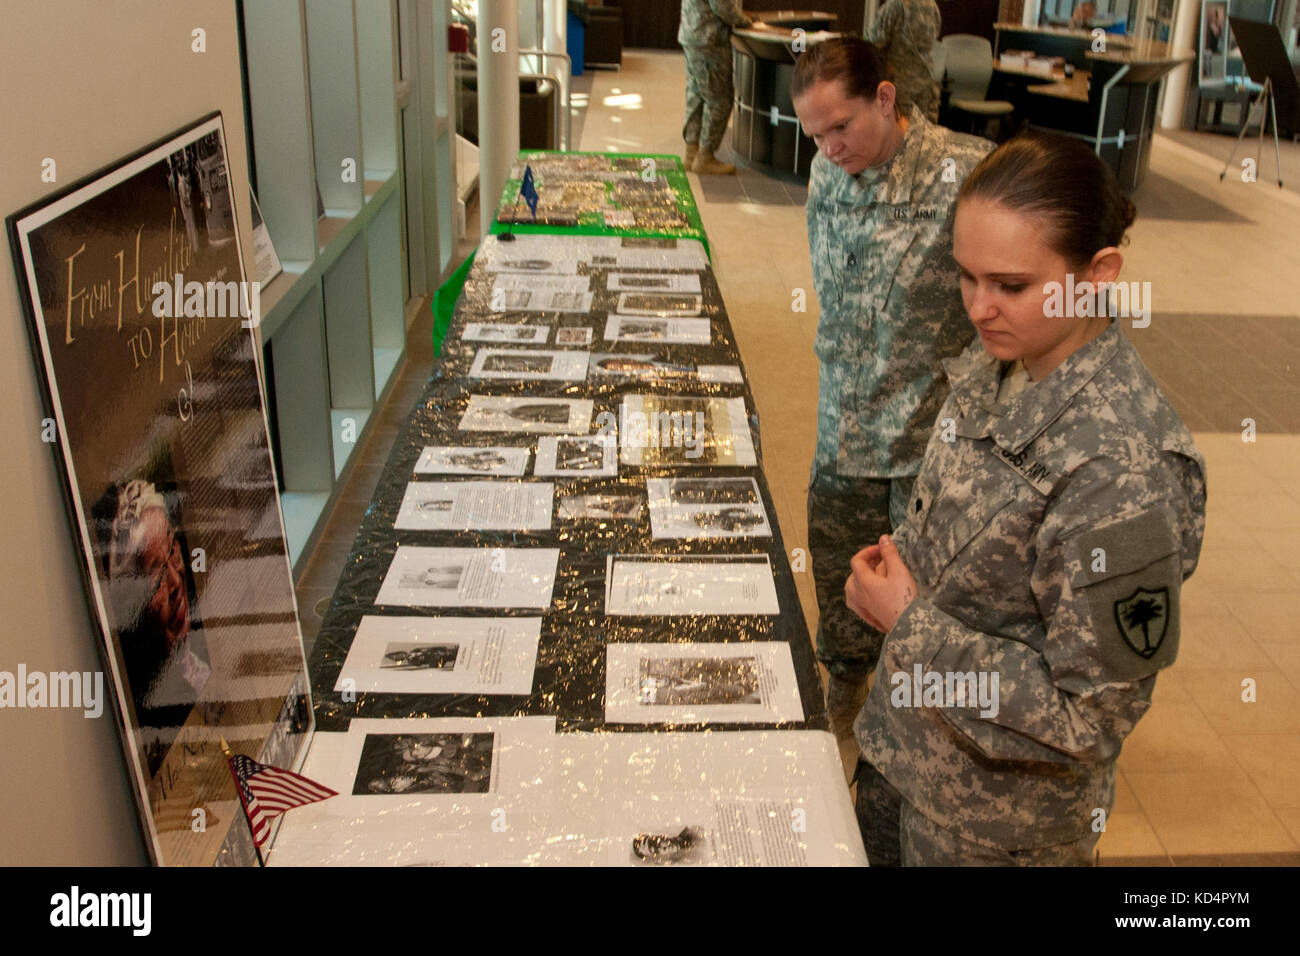 U.S. Army Staff Sgt. Leslie Krause (left) and Spc. Rachel Clark soldiers assigned to the South Carolina National Guard, look at displays during the black history month celebration at McEntire Joint National Guard, Feb. 27, 2014. The event was hosted by the joint diversity execute council, special presentations were given by Horrill Hill Elementary, Youth Challenge Academy and the guest speaker U.S. Army Lt. Col. Evet H. Jefferson, mobilization readiness division chief for the SCARNG.  (U.S. Air National Guard photo by Tech. Sgt. Jorge Intriago/Released) Stock Photo